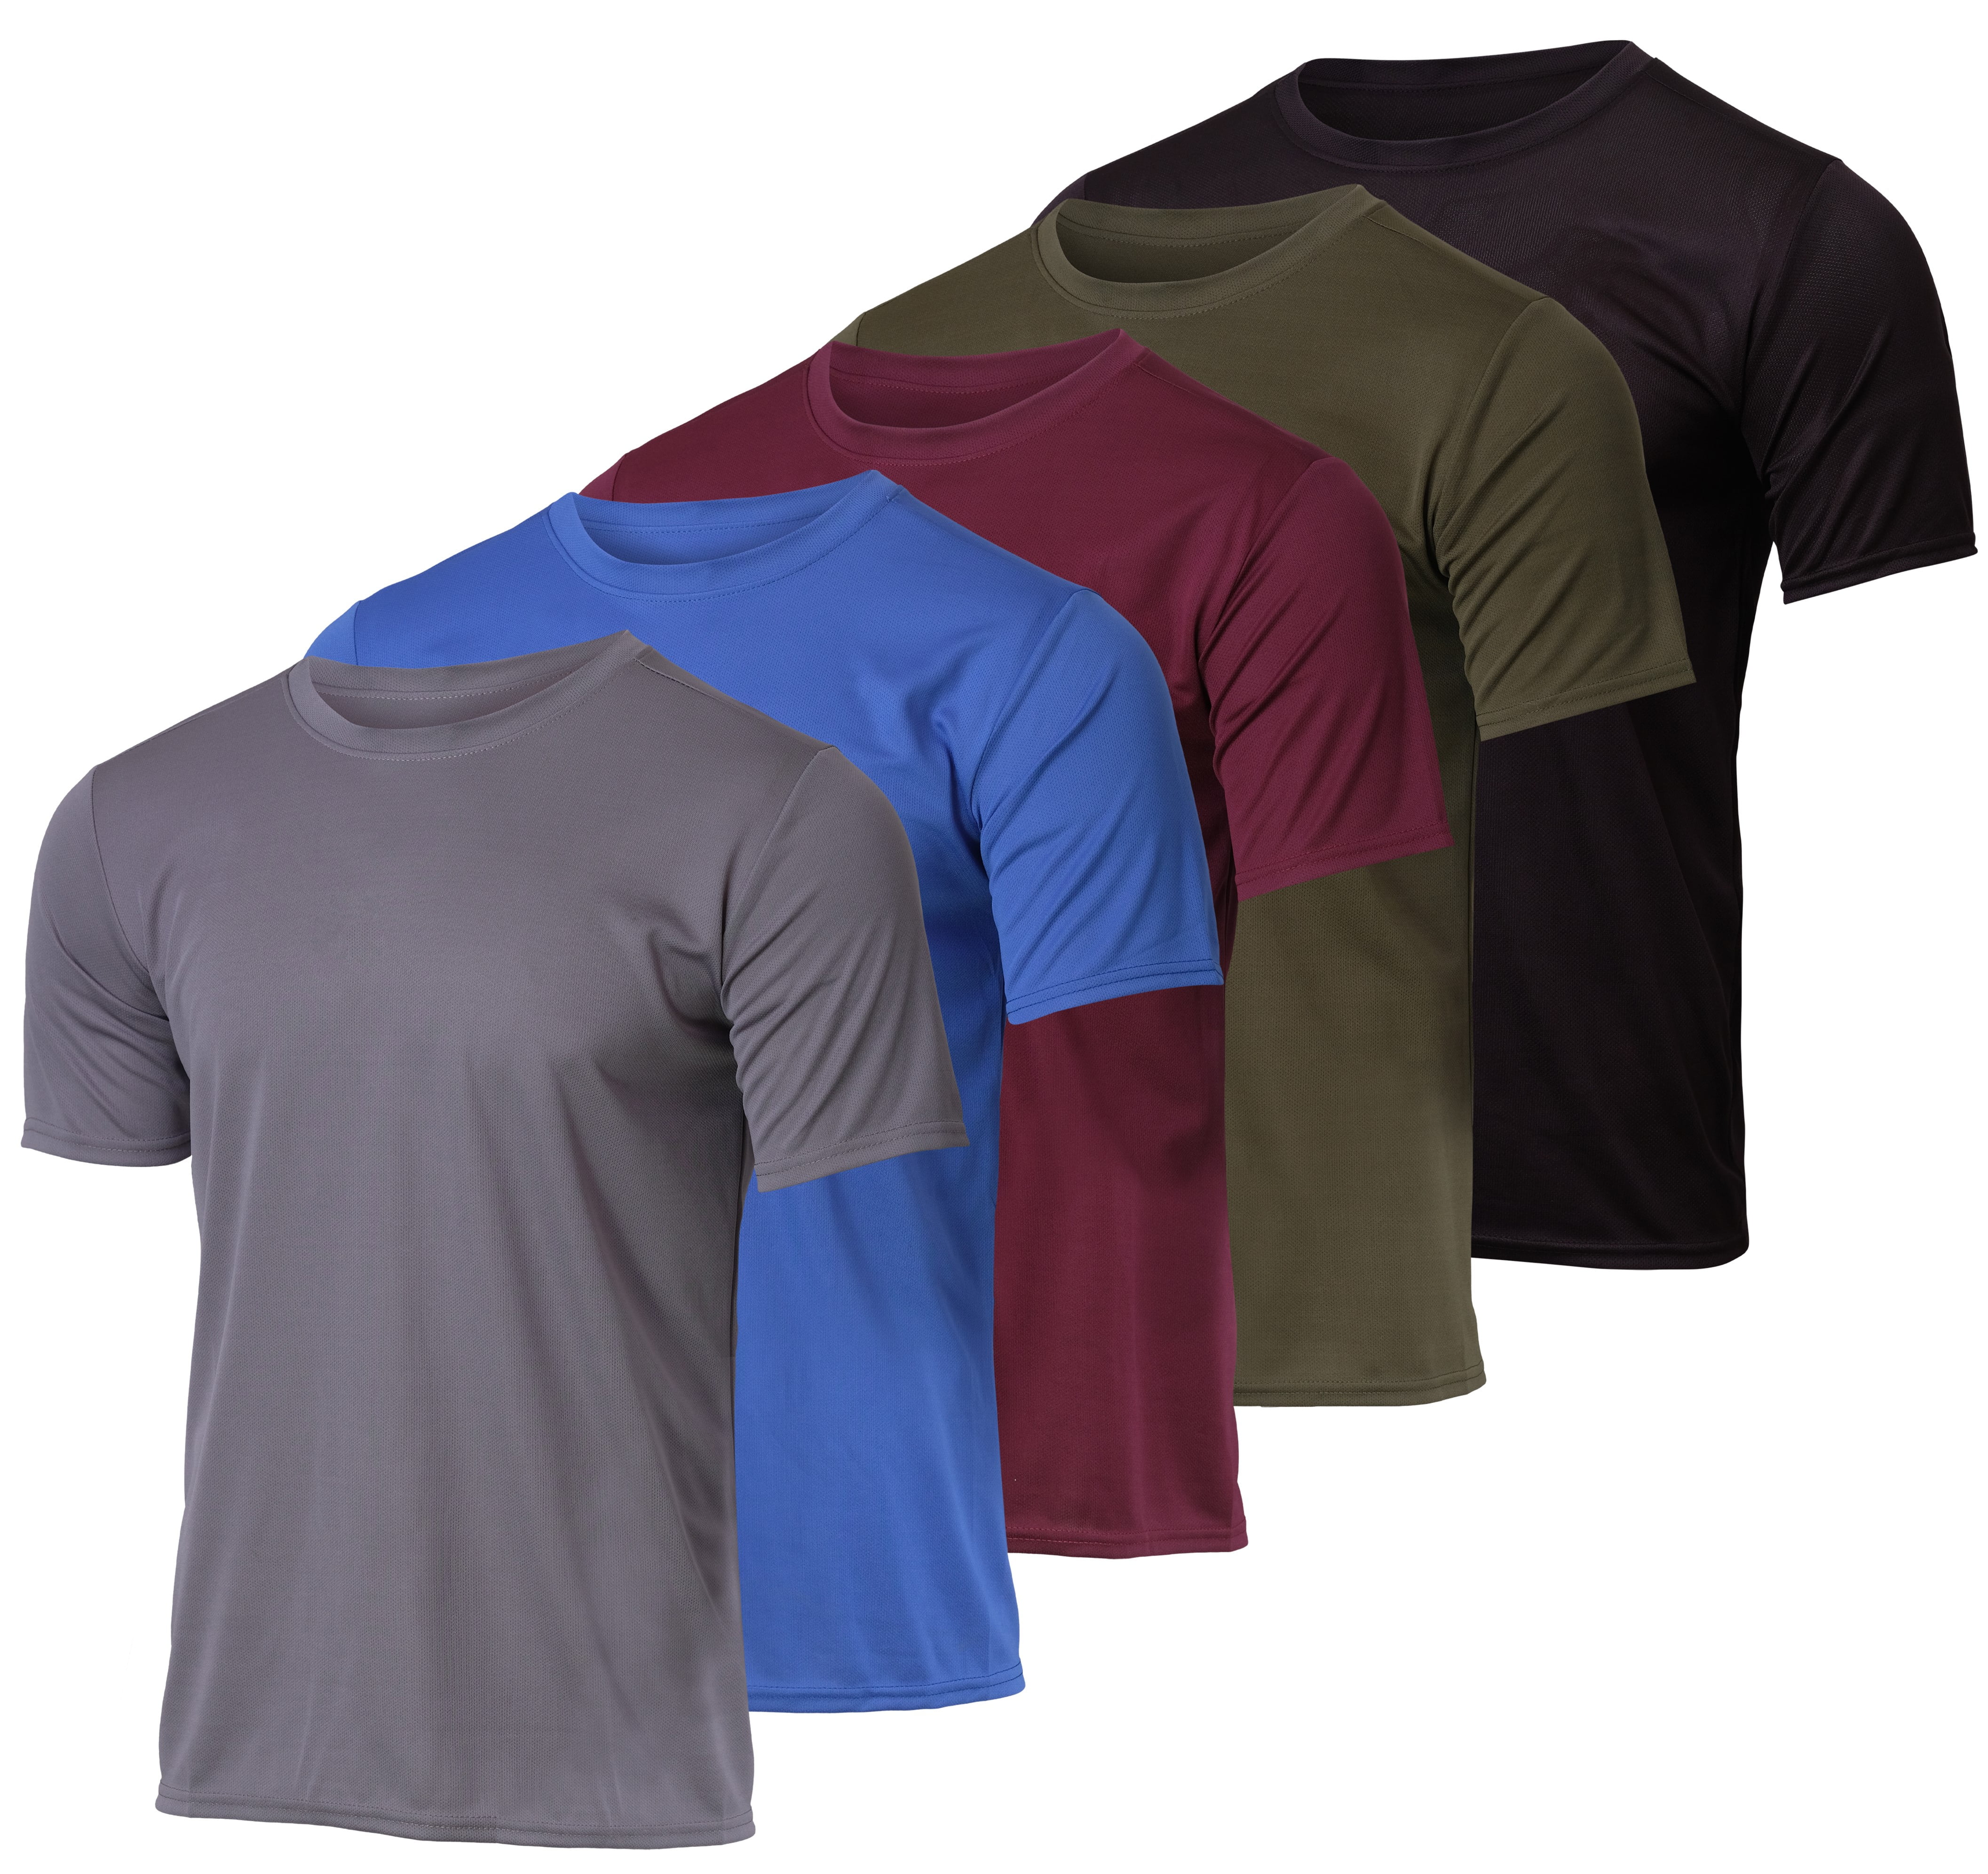 Essentials Men's Active Performance Tech T-Shirt (Available in Big &  Tall), Pack of 2